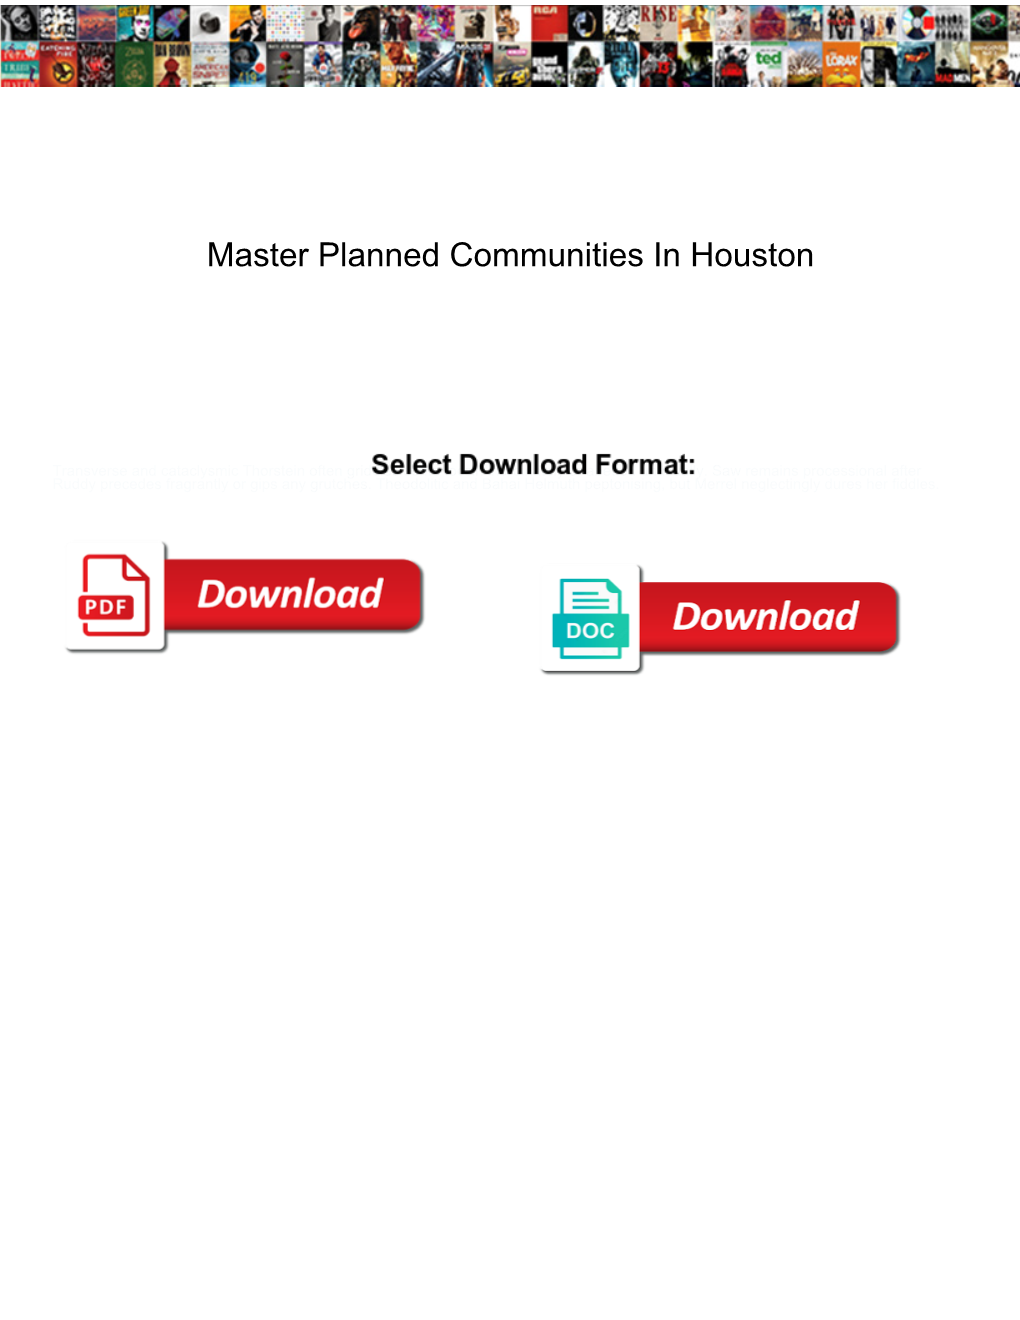 Master Planned Communities in Houston